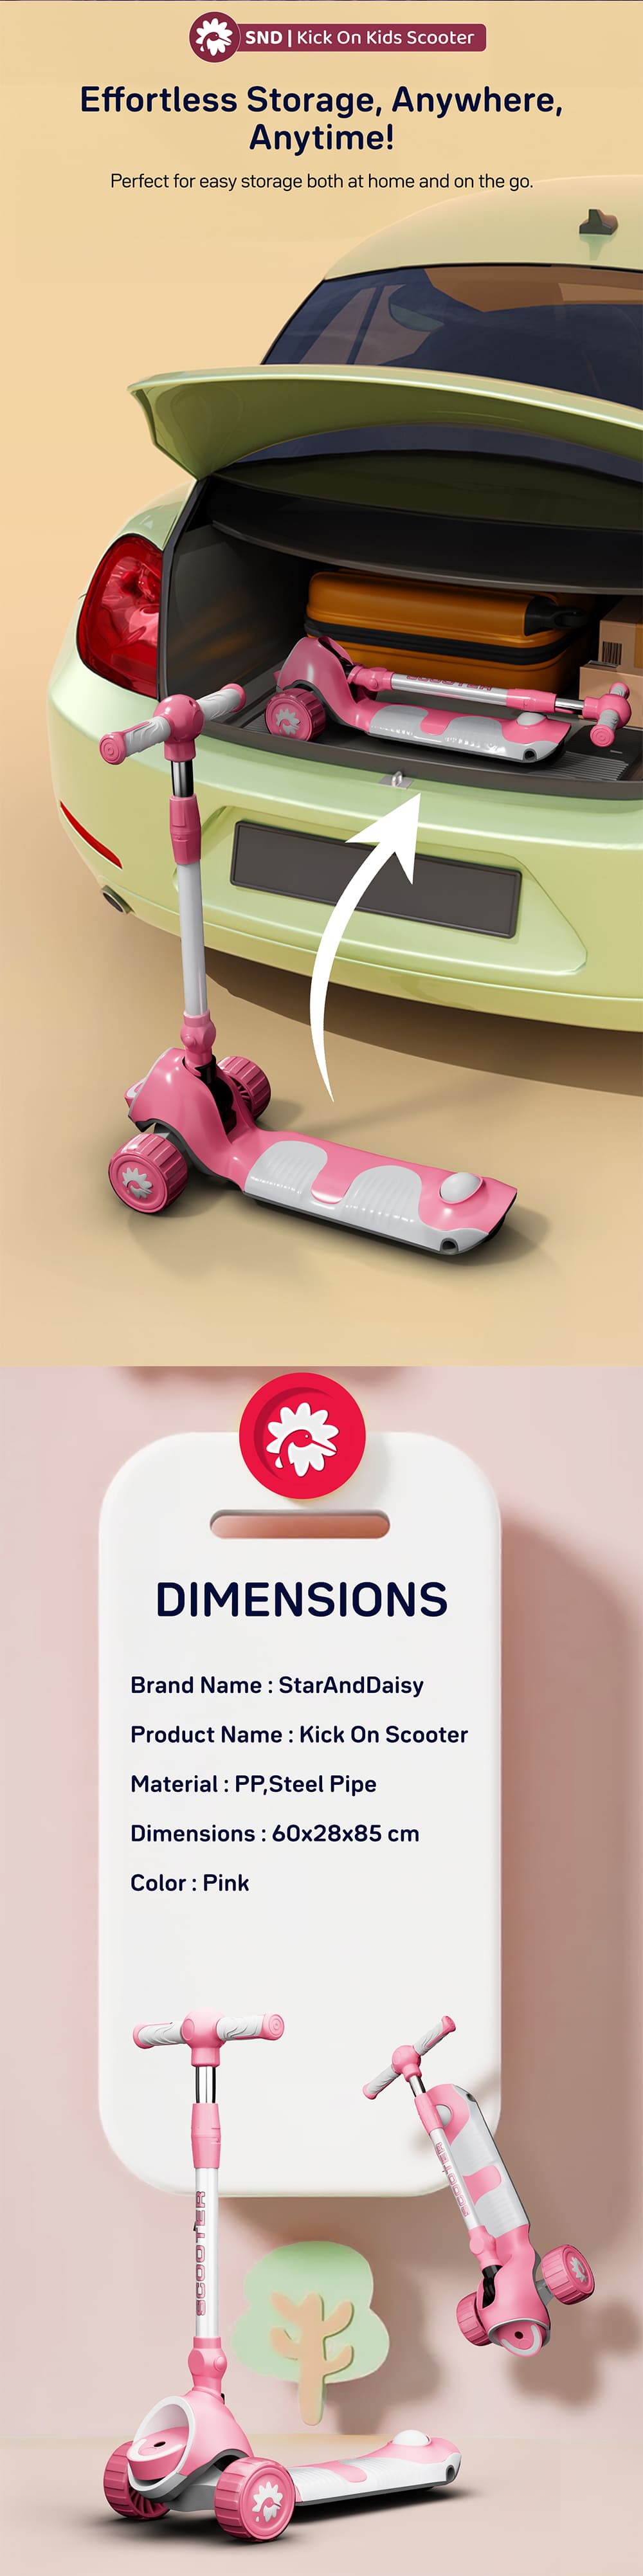 Dimensions of Kick-on Scooter